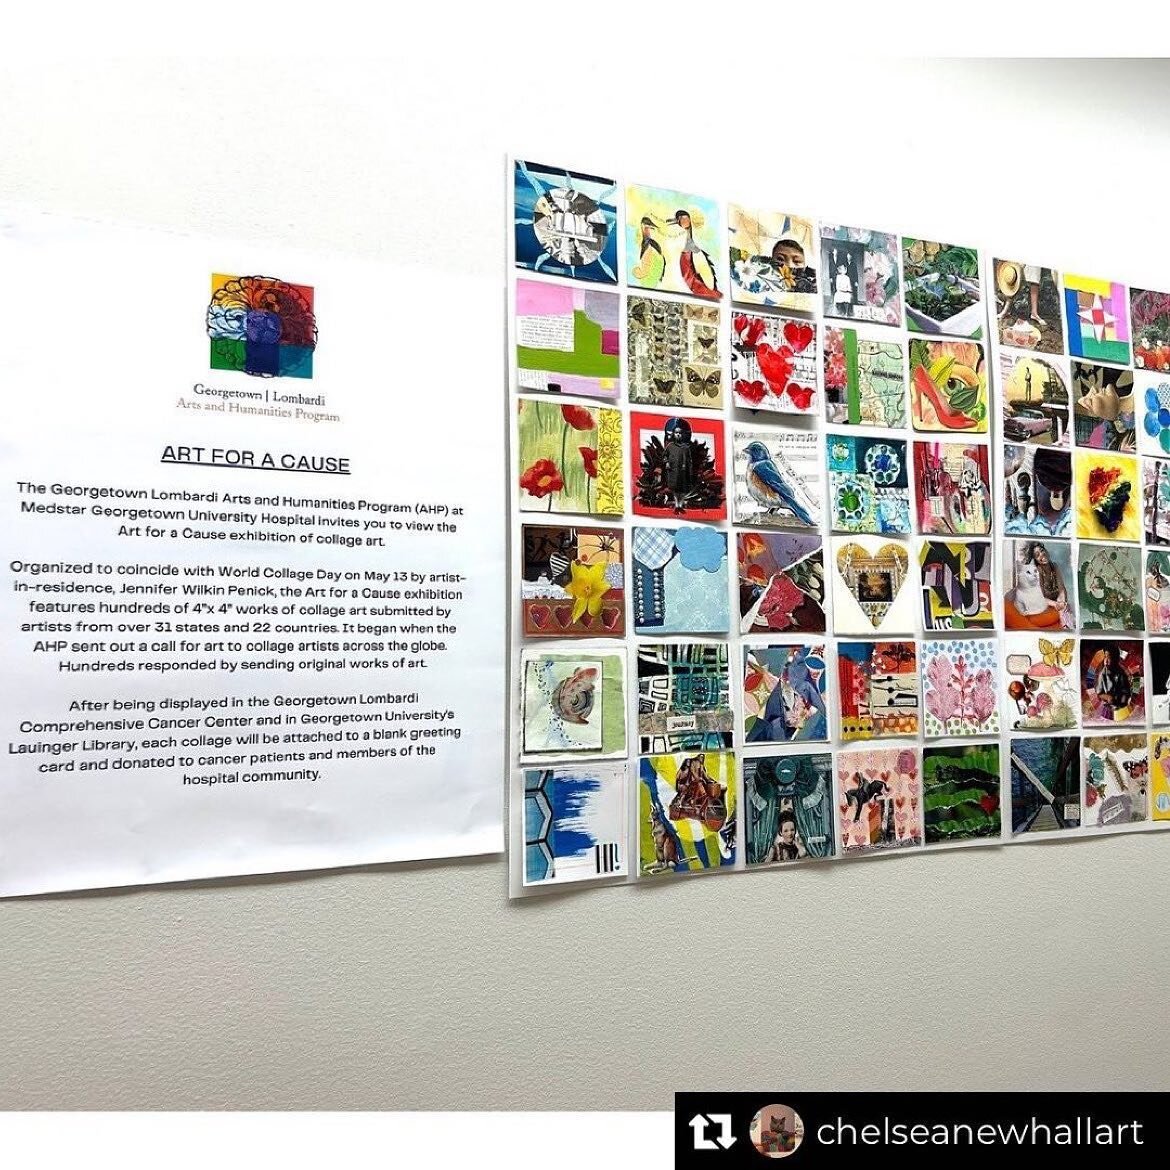 4,000 collages! Art for a Cause exhibit organized by @georgetownartsandhumanities in support of cancer patients at the Georgetown Lombardi hospital. A couple of my collages are included and will be given to patients at the hospital after the exhibit.